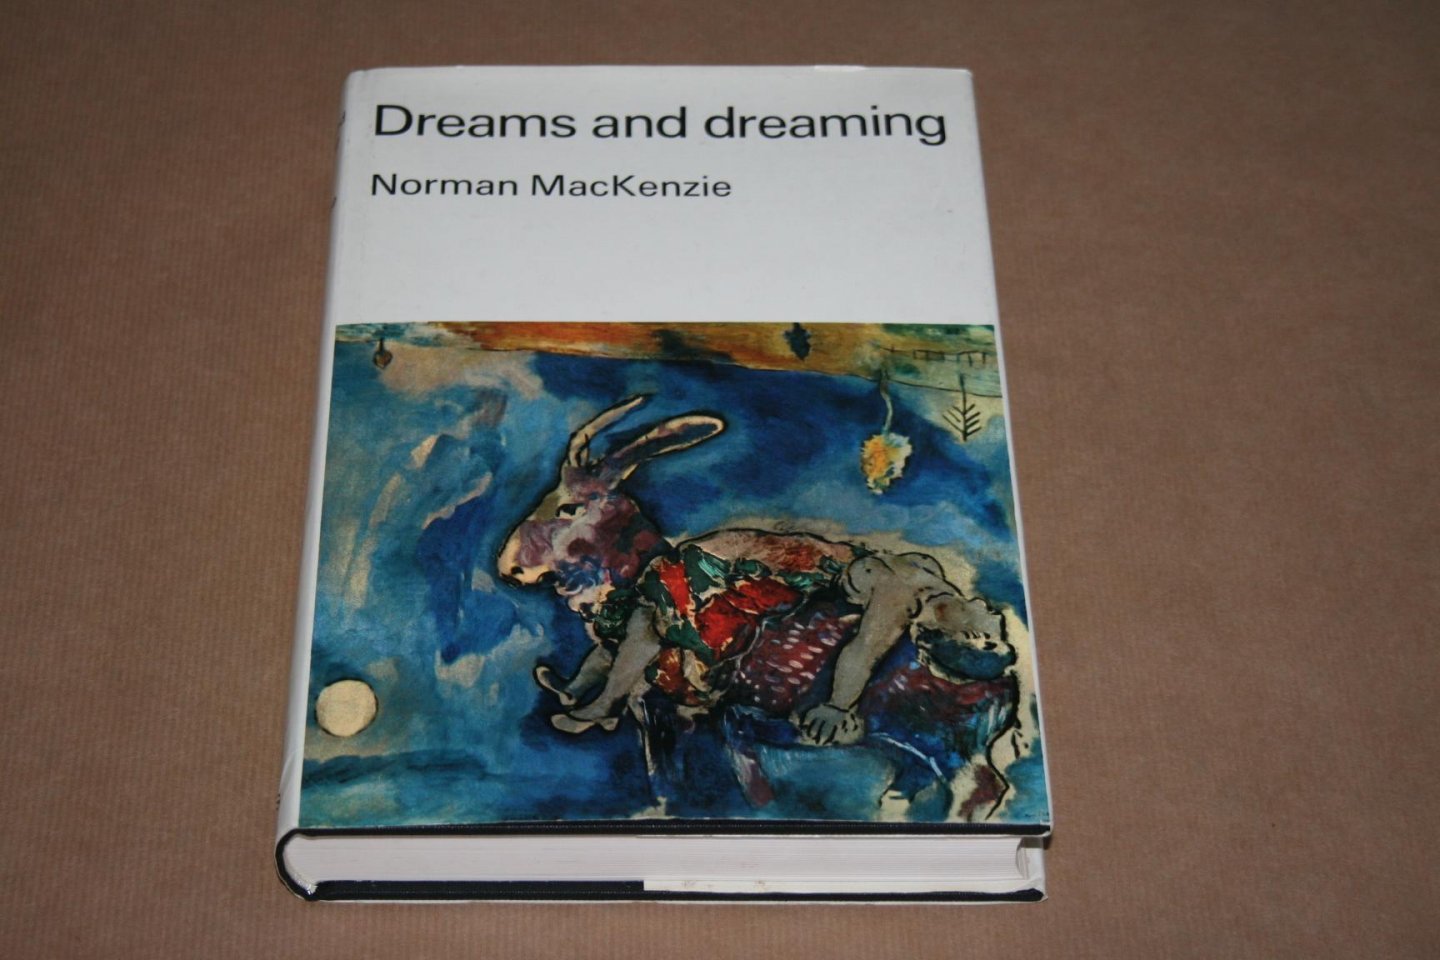 Norman MacKenzie - Dreams and dreaming